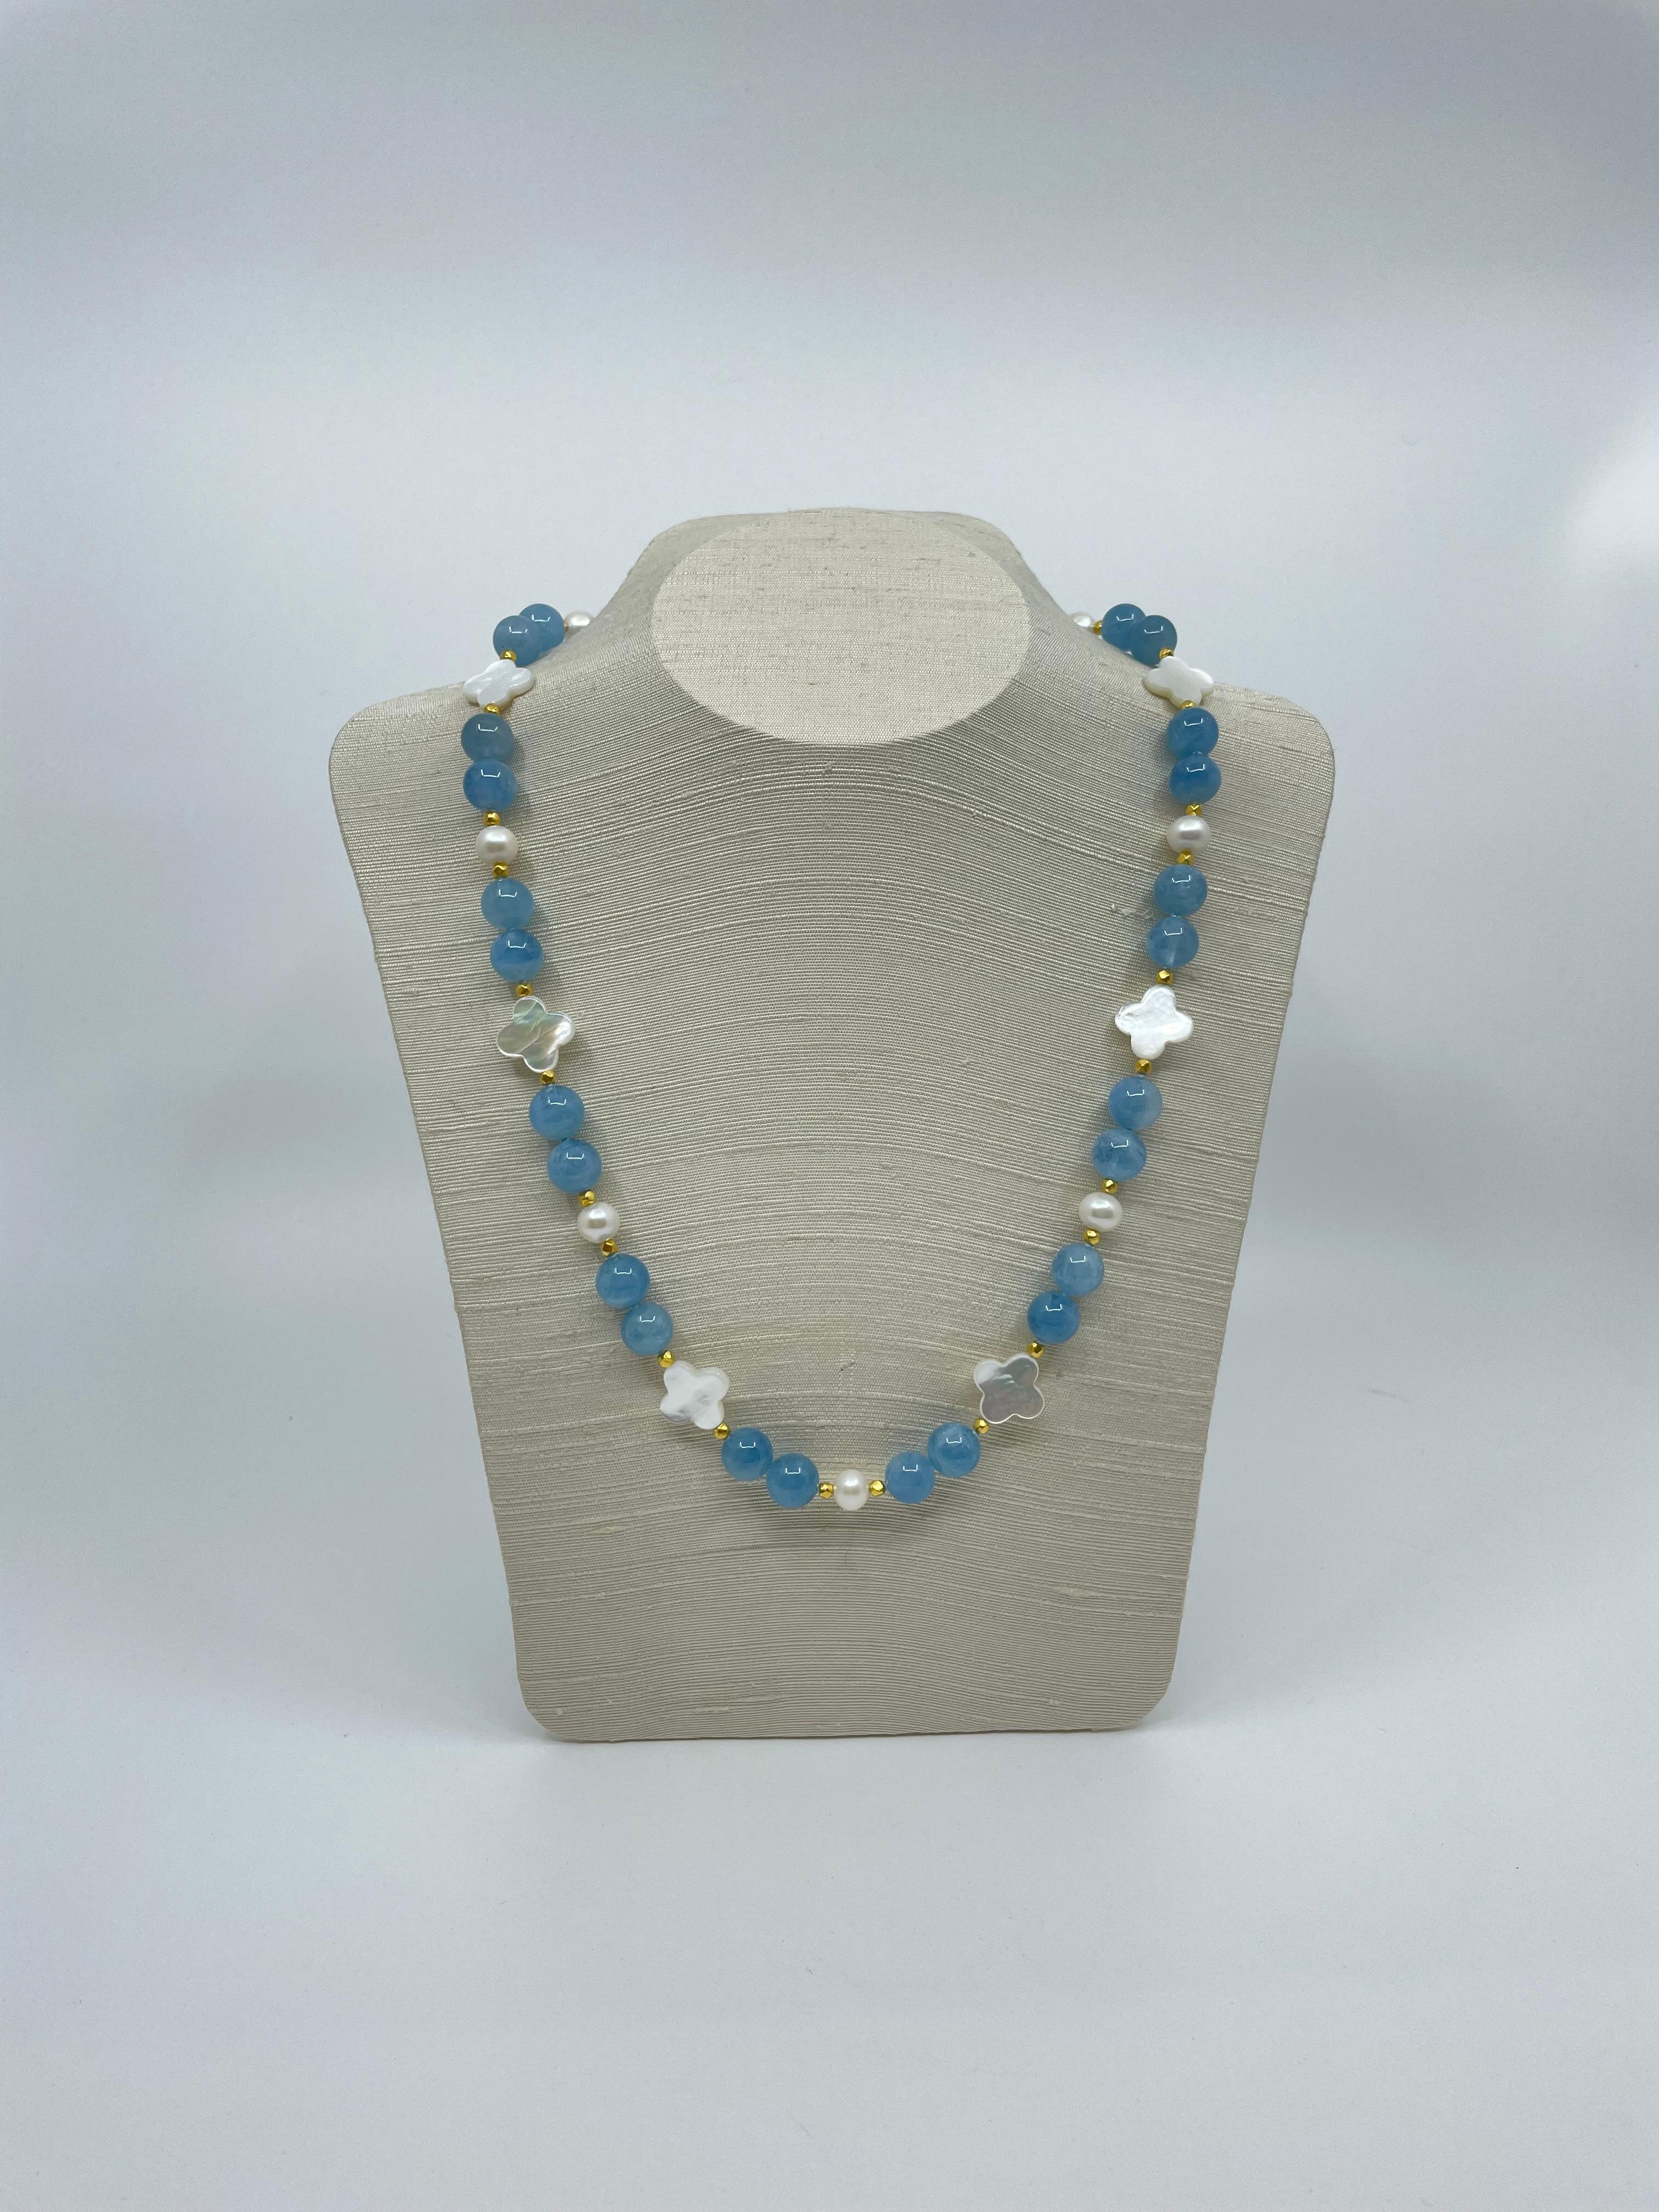 The strong blue color of the aquamarine beads is accentuated by the quatrefoil mother-of-pearl beads, freshwater pearls & 18k faceted gold beads. This attractive necklace at 23”(58.4cm) L is exquisite for summer days and nights.

Wearable Jewels by